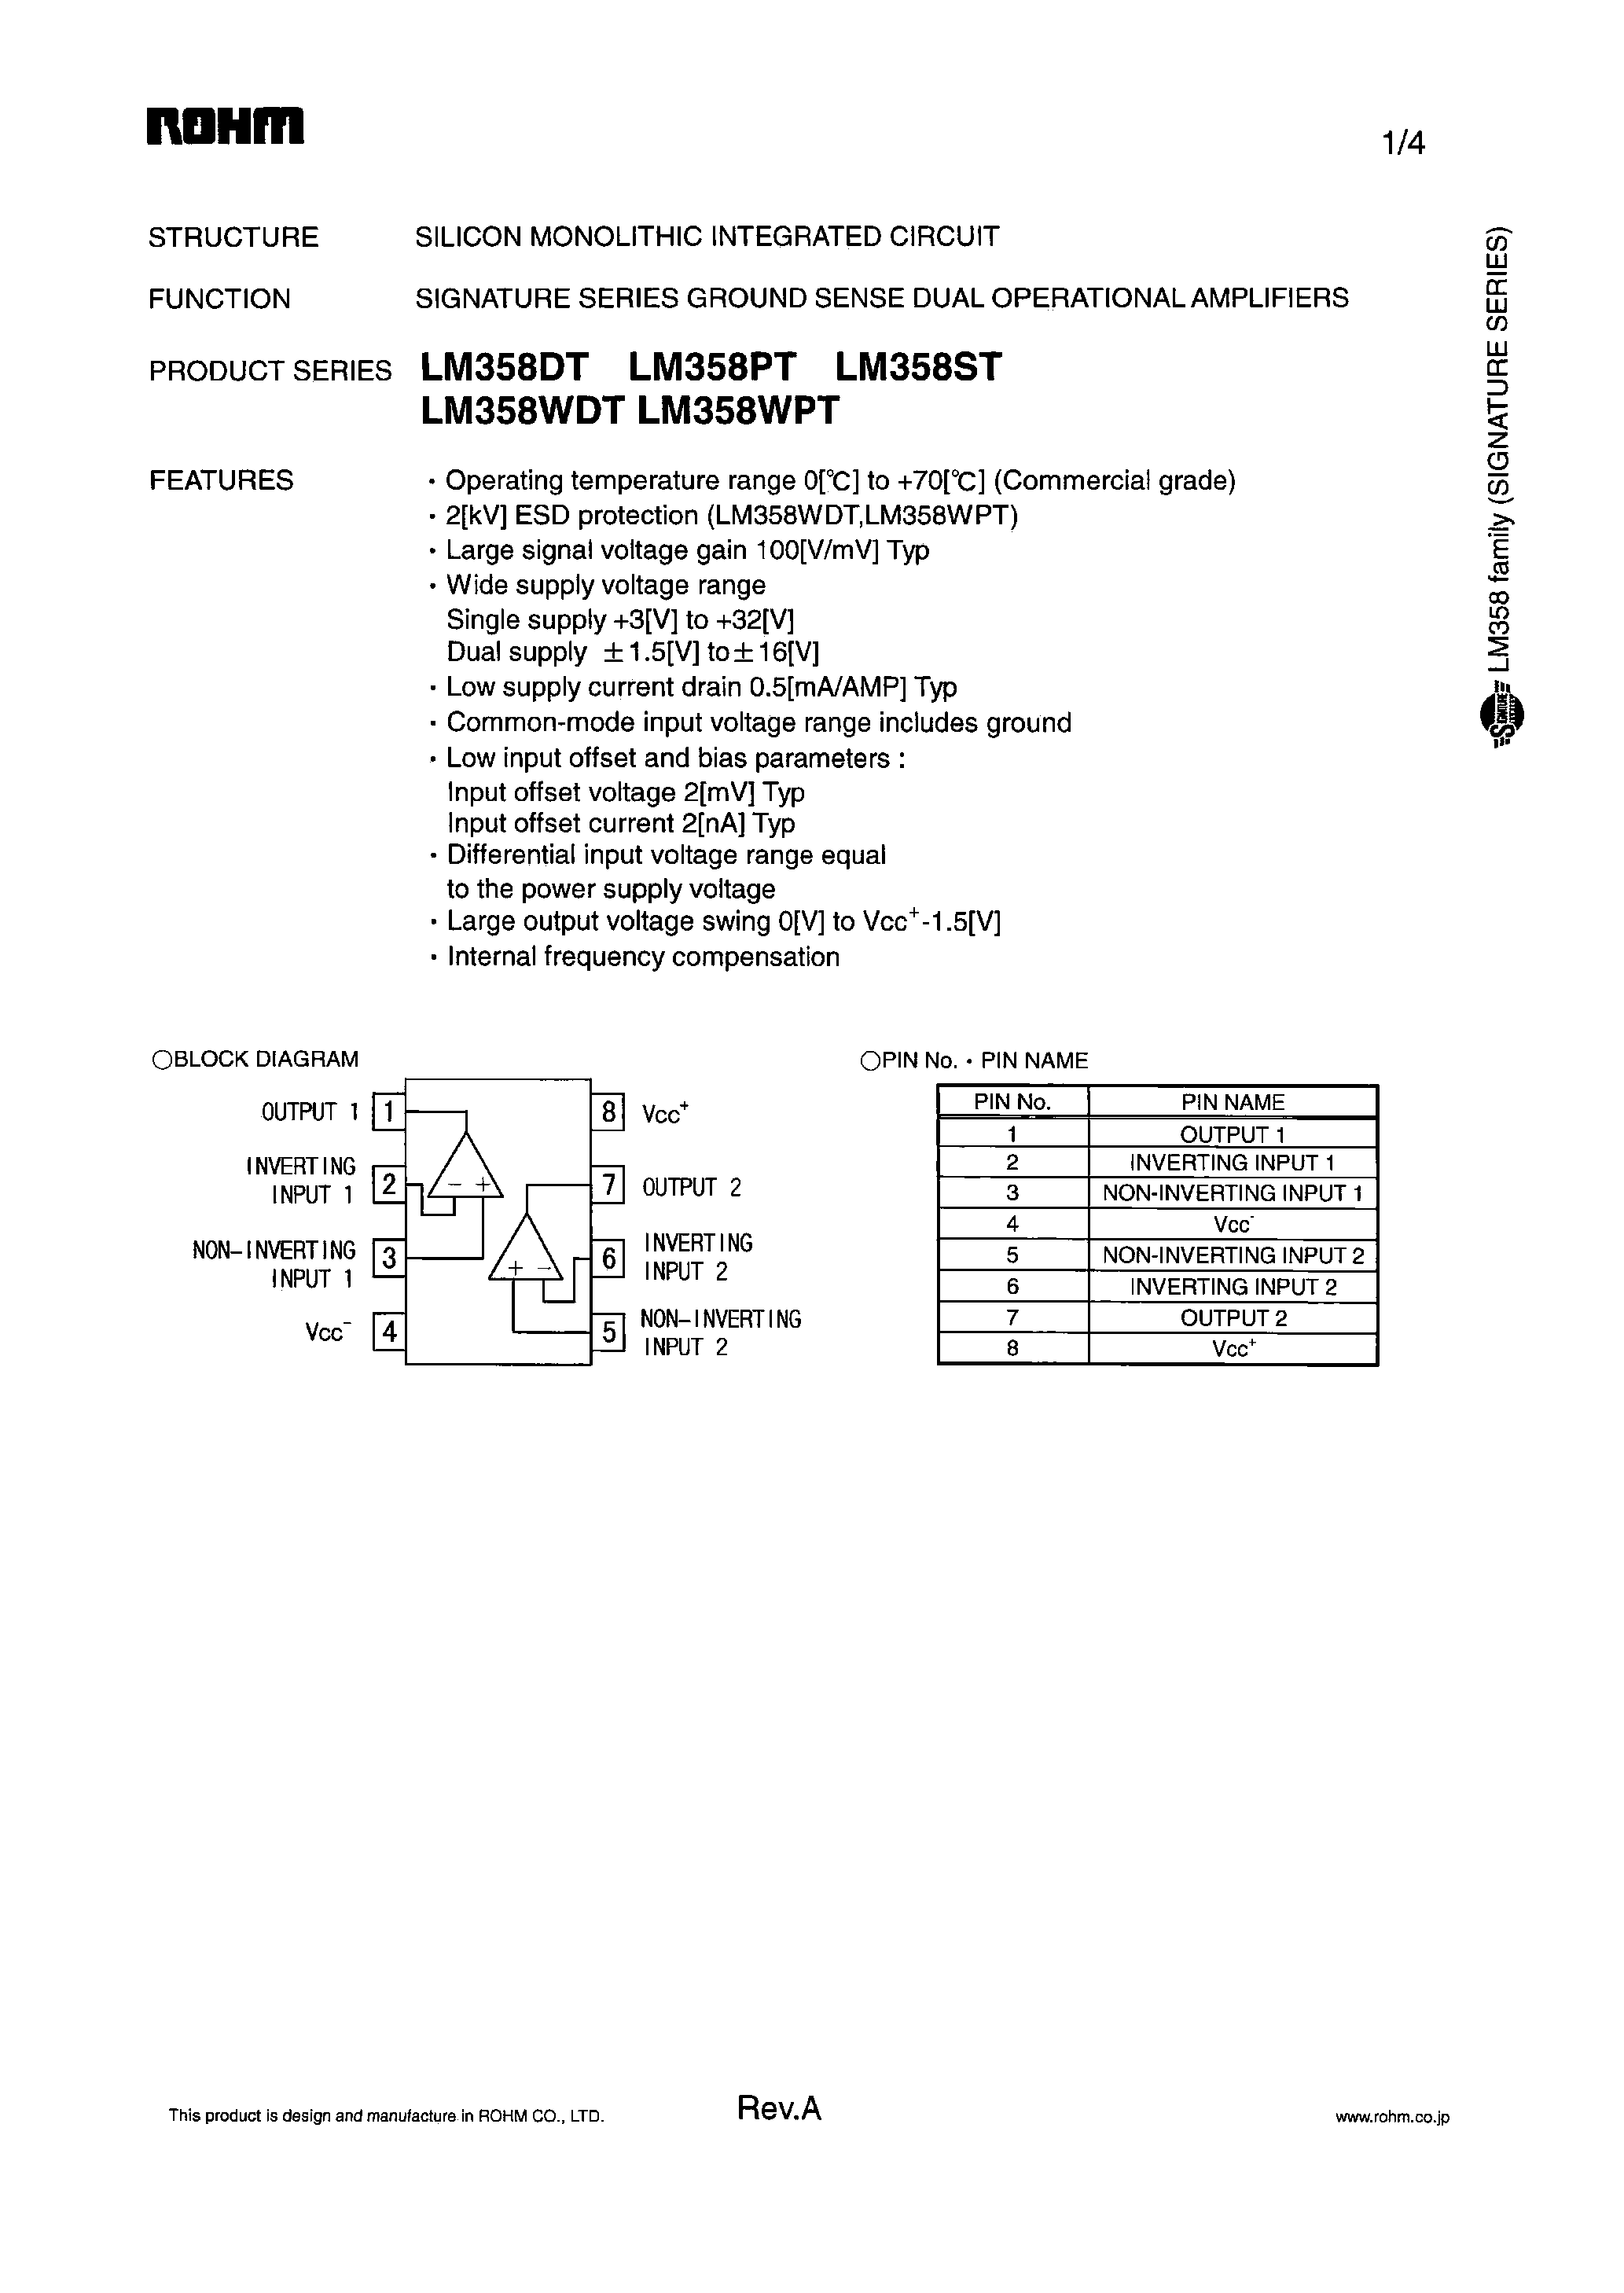 Datasheet LM358DT - (LM358xx) SILICON MONNOLITHIC INTEGRATED CIRCUIT page 1